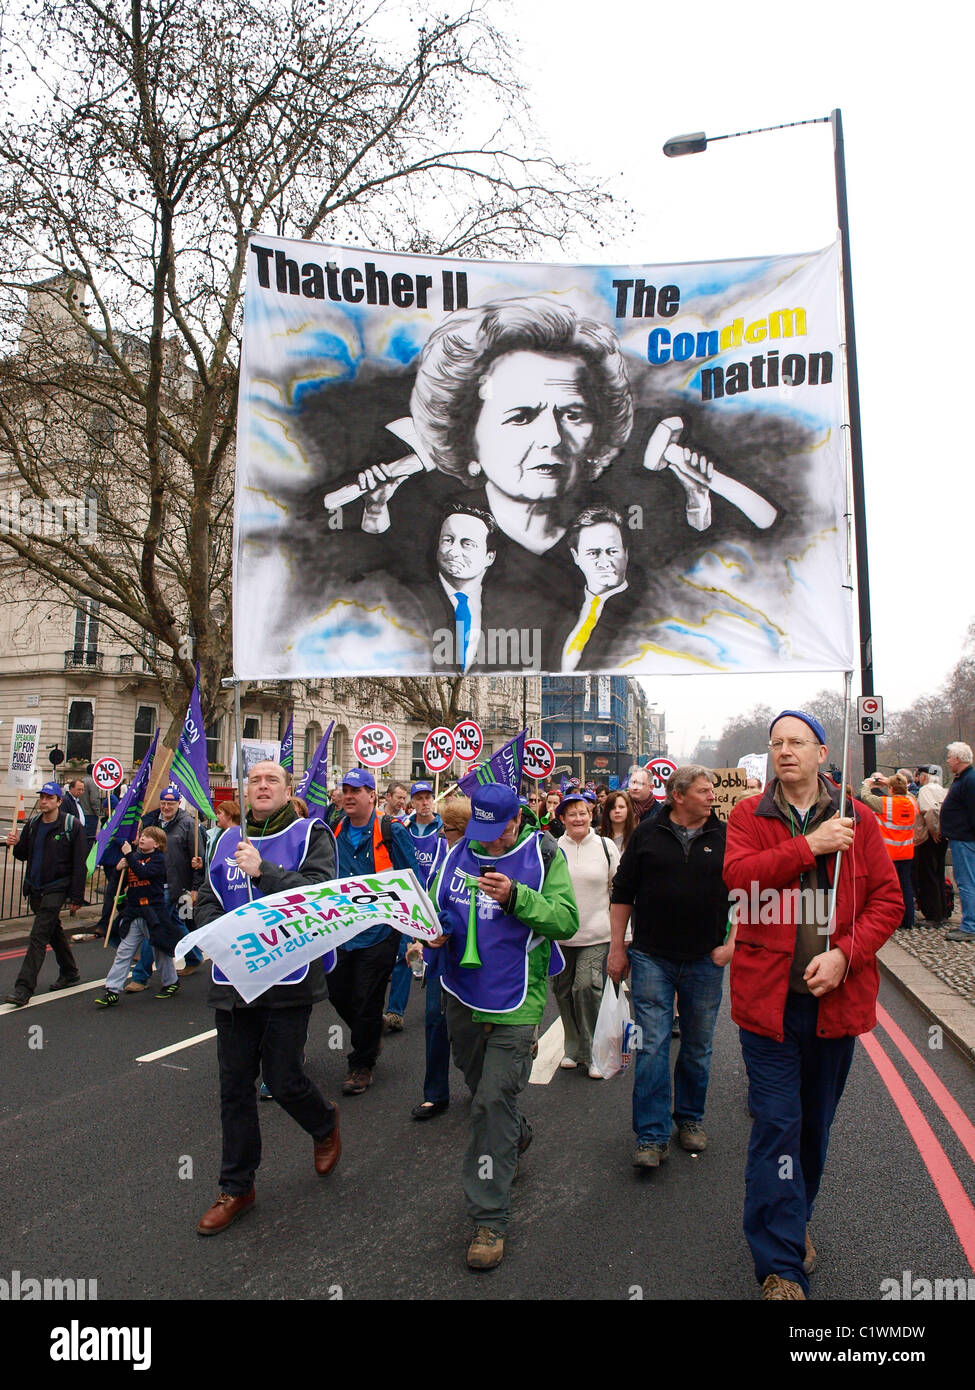 26 March 2011 National TUC Demonstration against the cuts. London Stock Photo